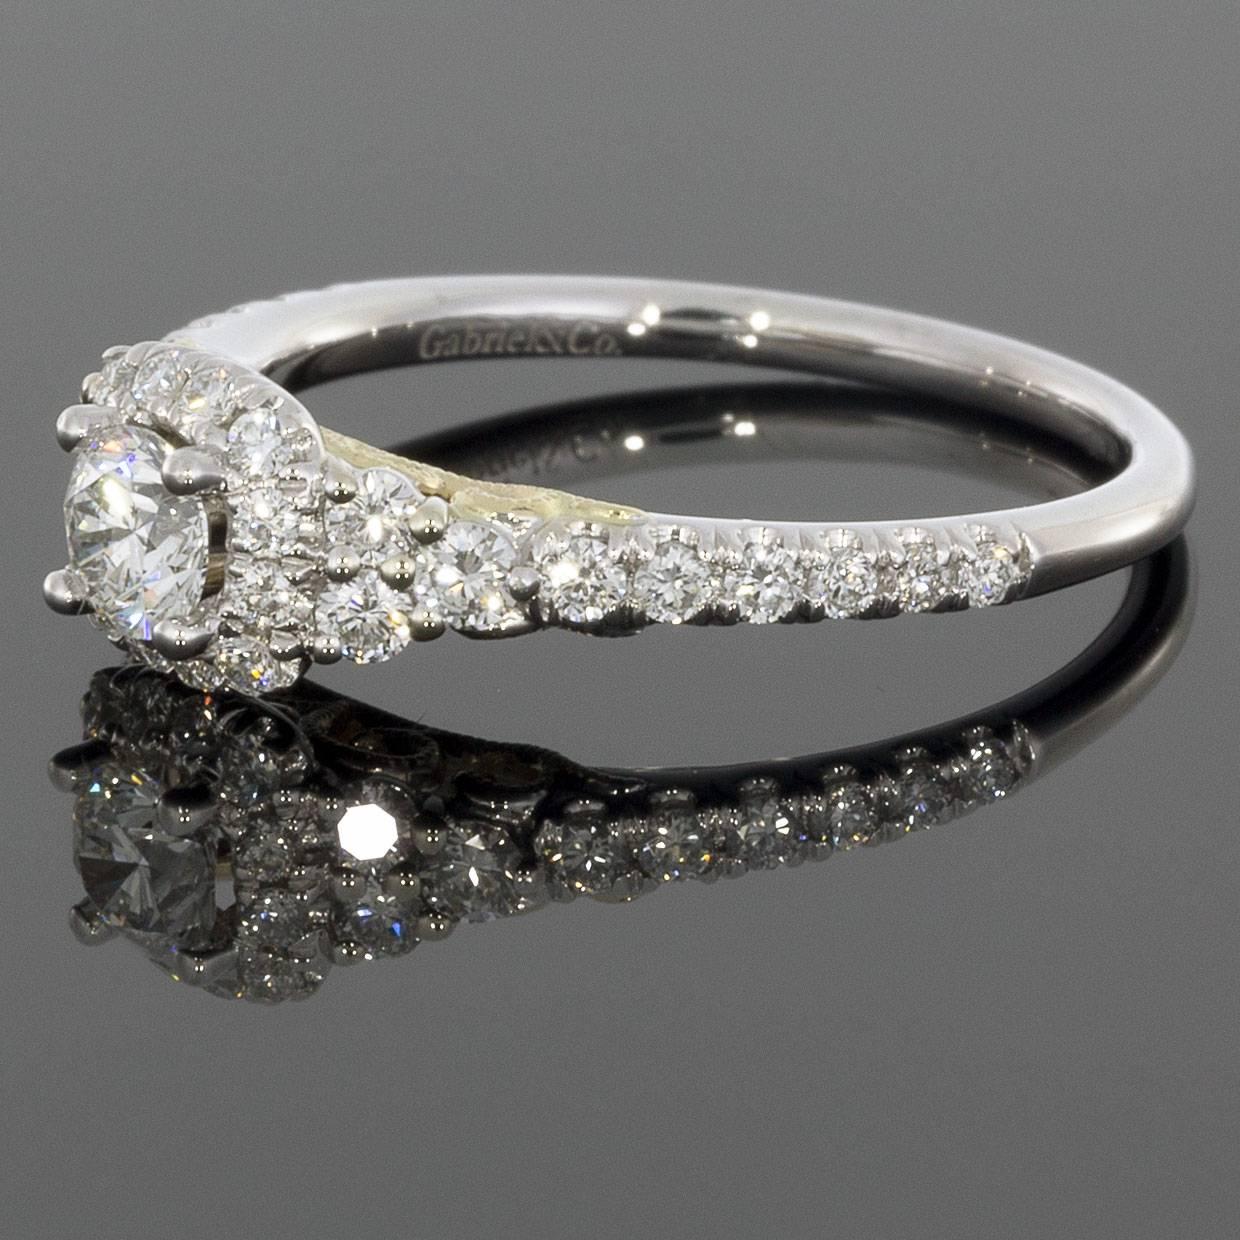 Details:
14K white gold with 14K yellow gold gallery accent
0.24CT Round center diamond
0.70CTW round accent diamonds
Finger size 6.5 
Comes in a beautiful presentation box
An adult signature will be required for delivery unless other arrangements